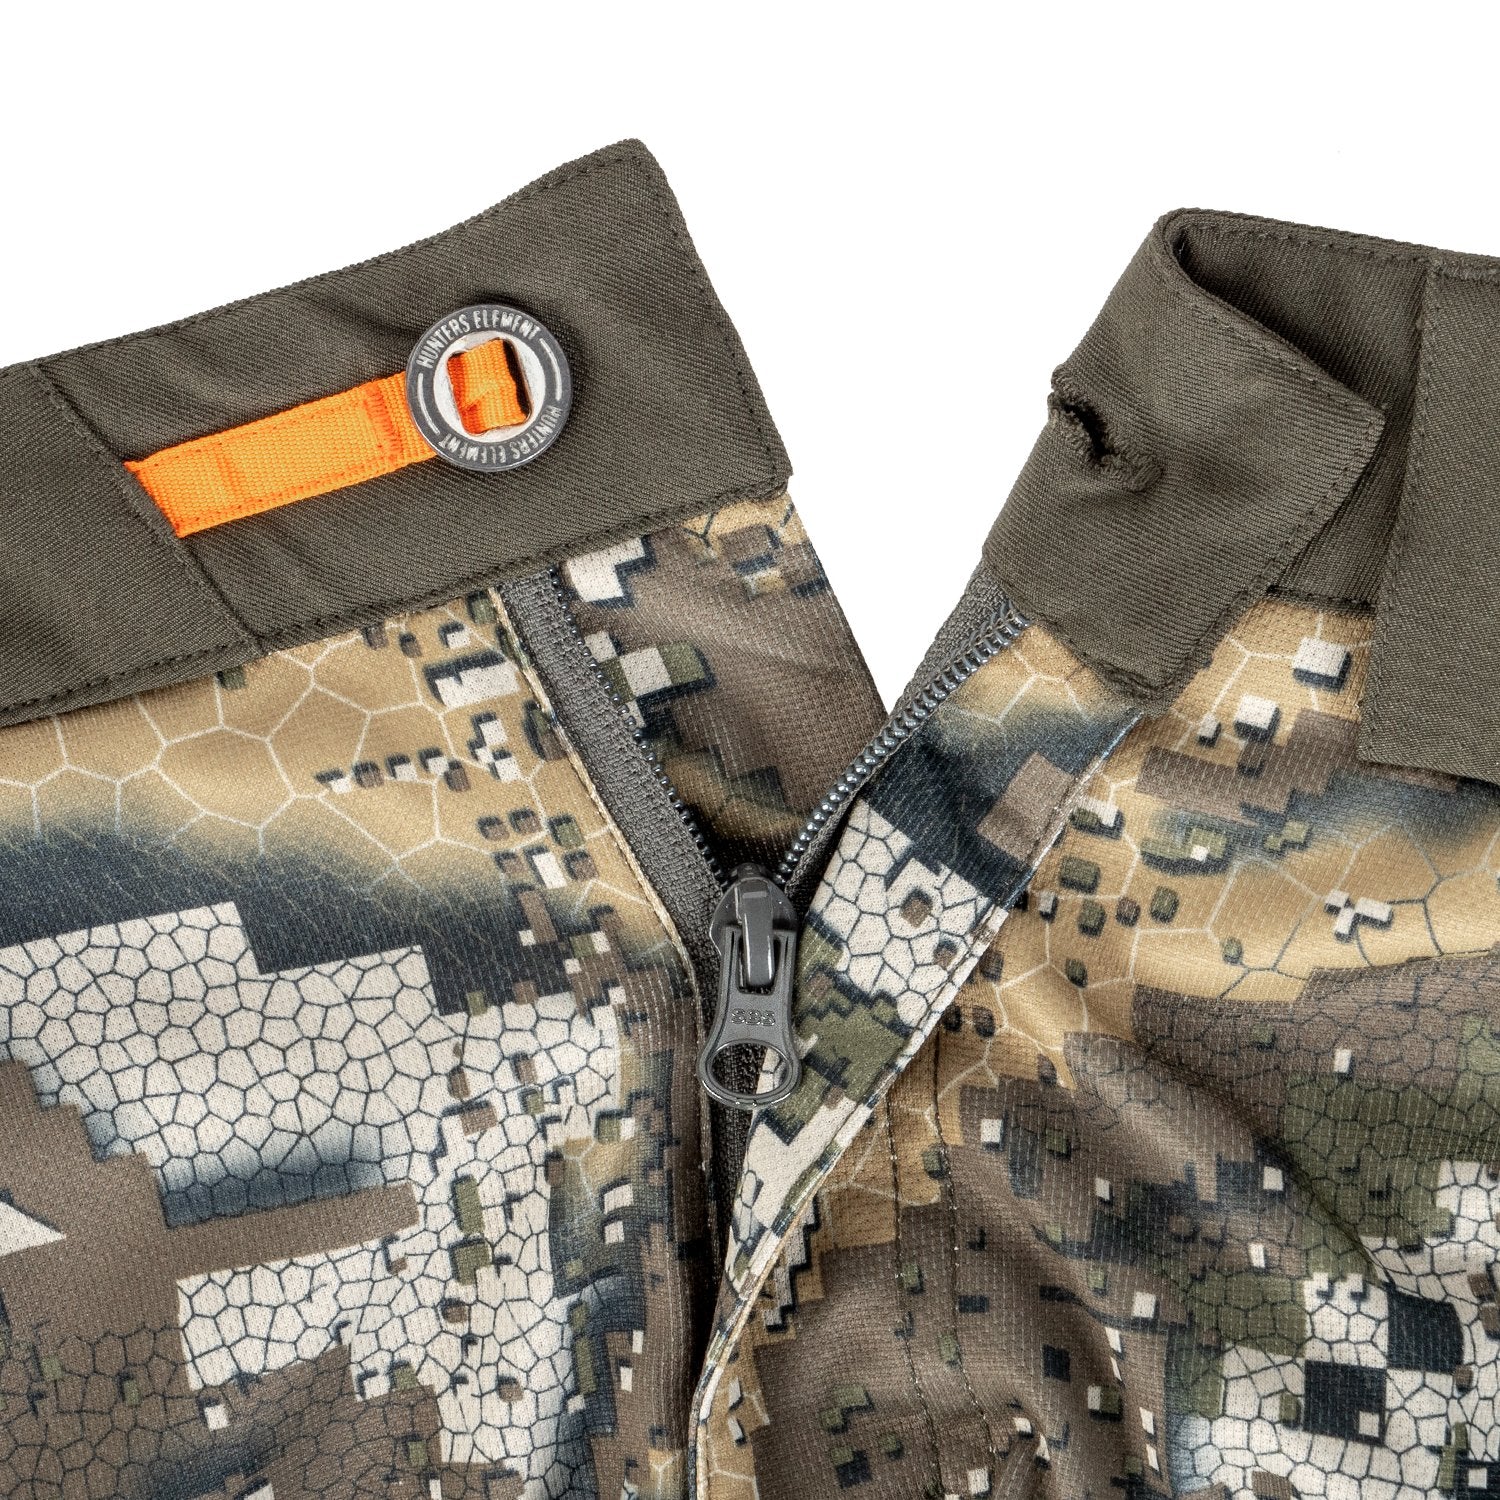 Hunters Element, Spur Pants, 4-Way Stretch Zip Up Hunting Pants